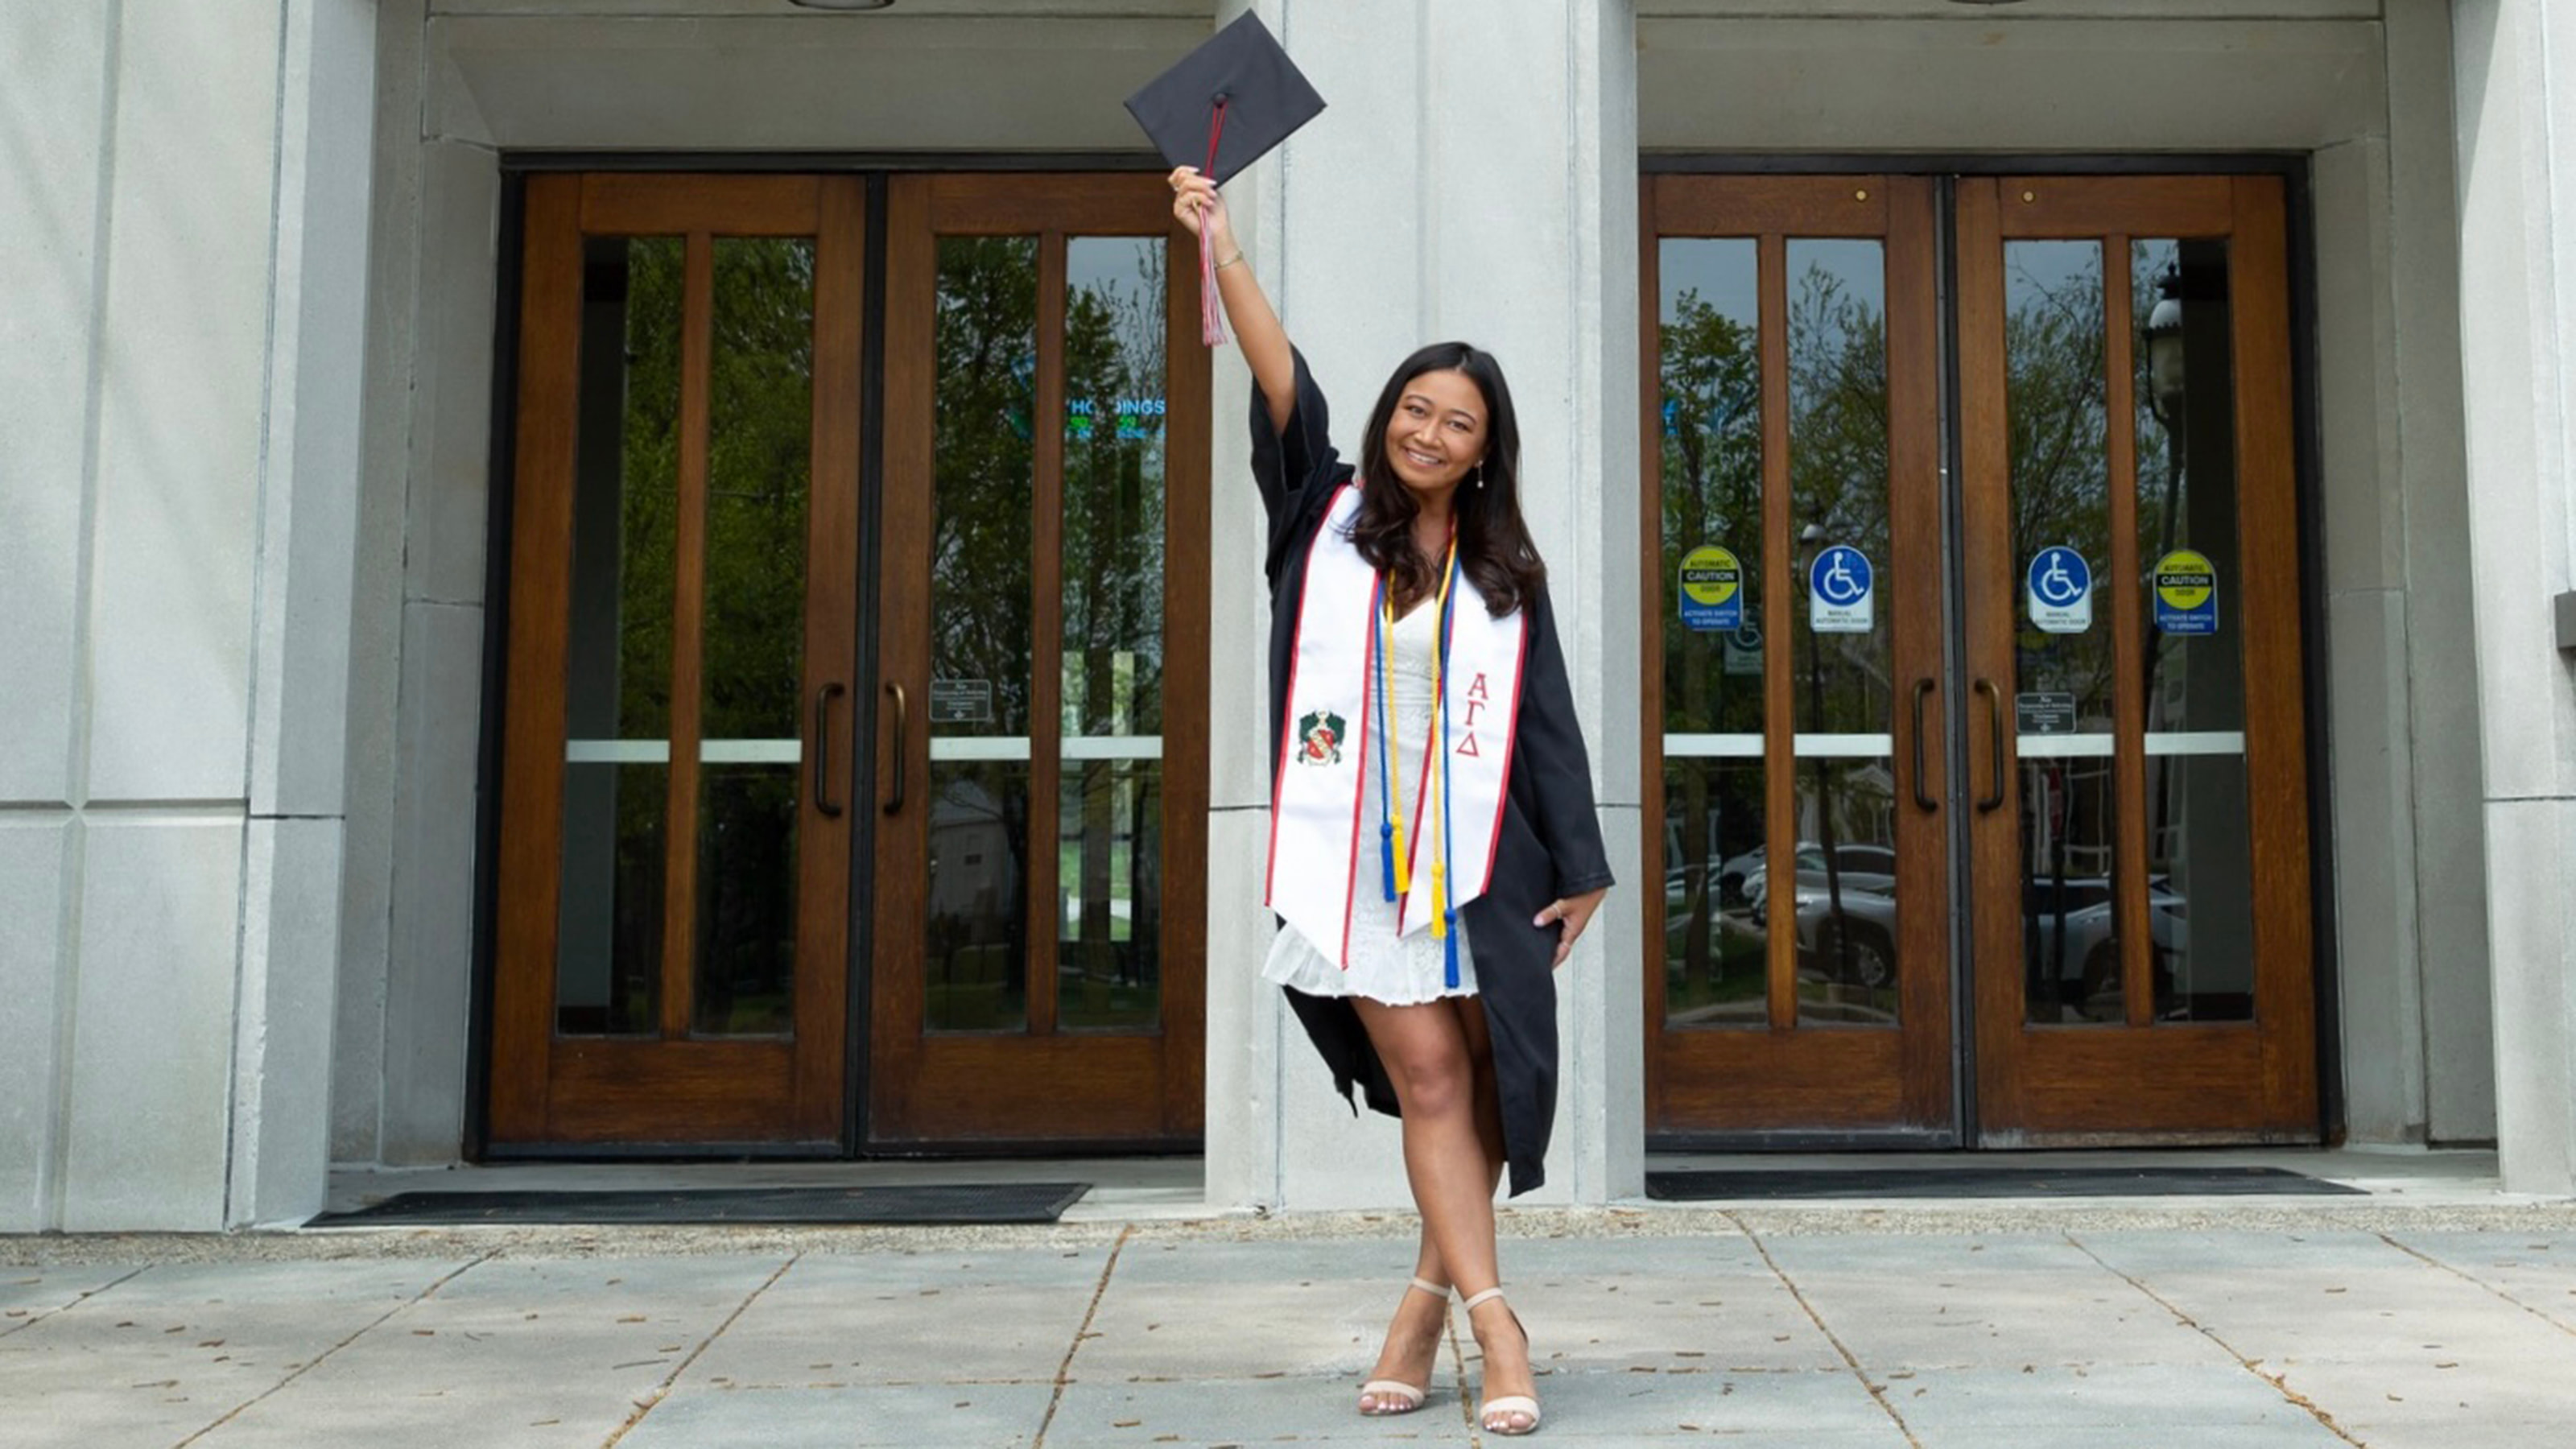 Theresa Luu in graduation attire in front of Mandeville Hall